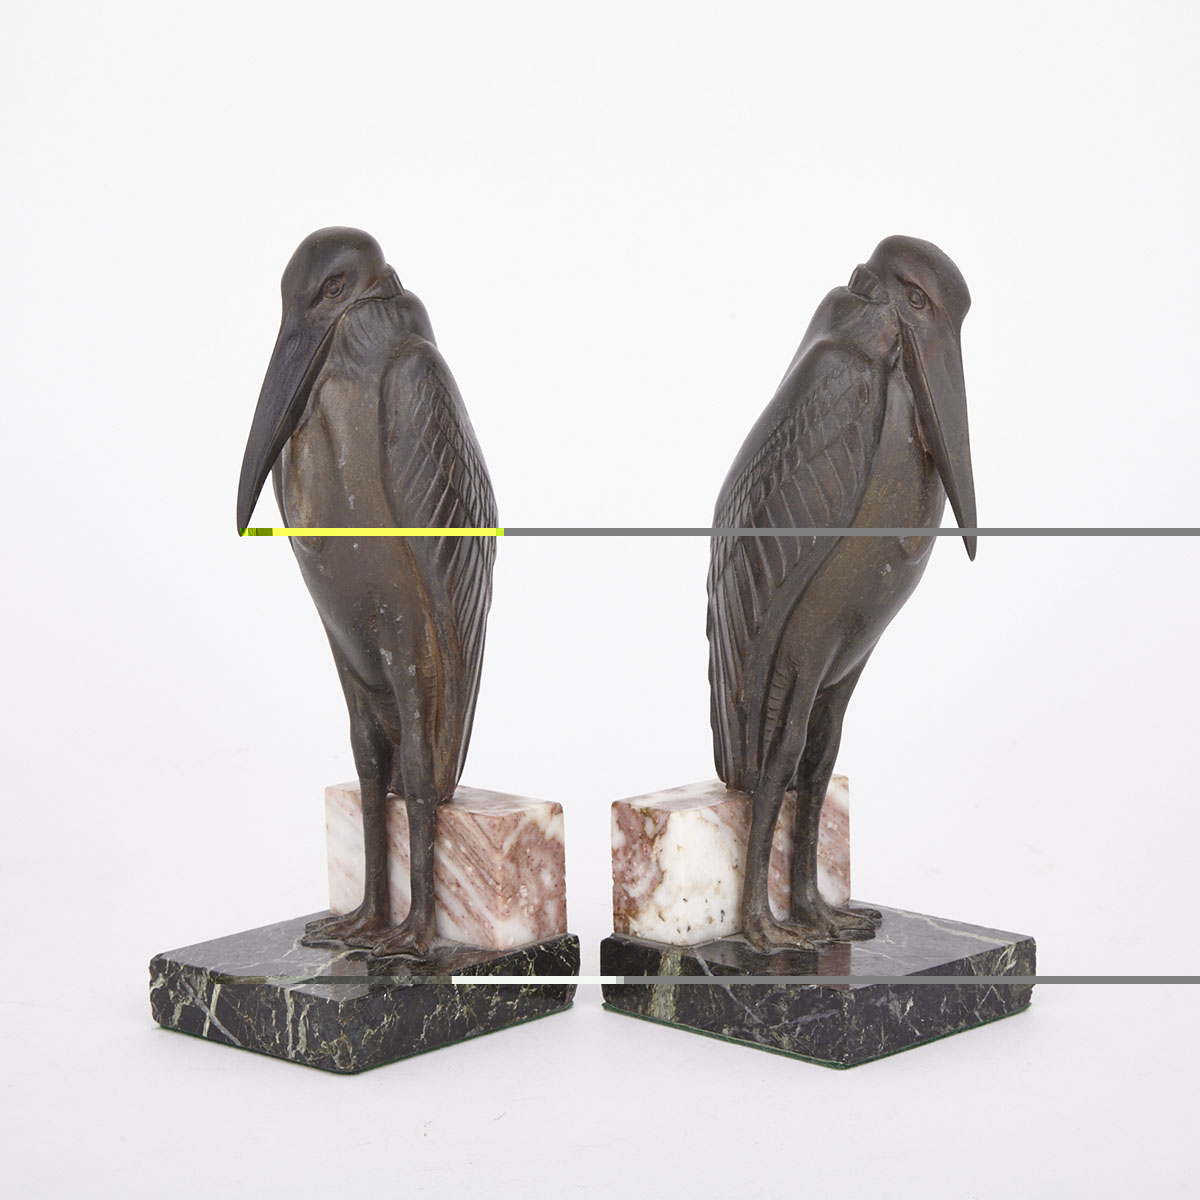 Pair of French Art Deco Patinated Metal Marabou Stork Form Bookends After the Model by Louis Albert Carvin (1875-1951), early 20th century